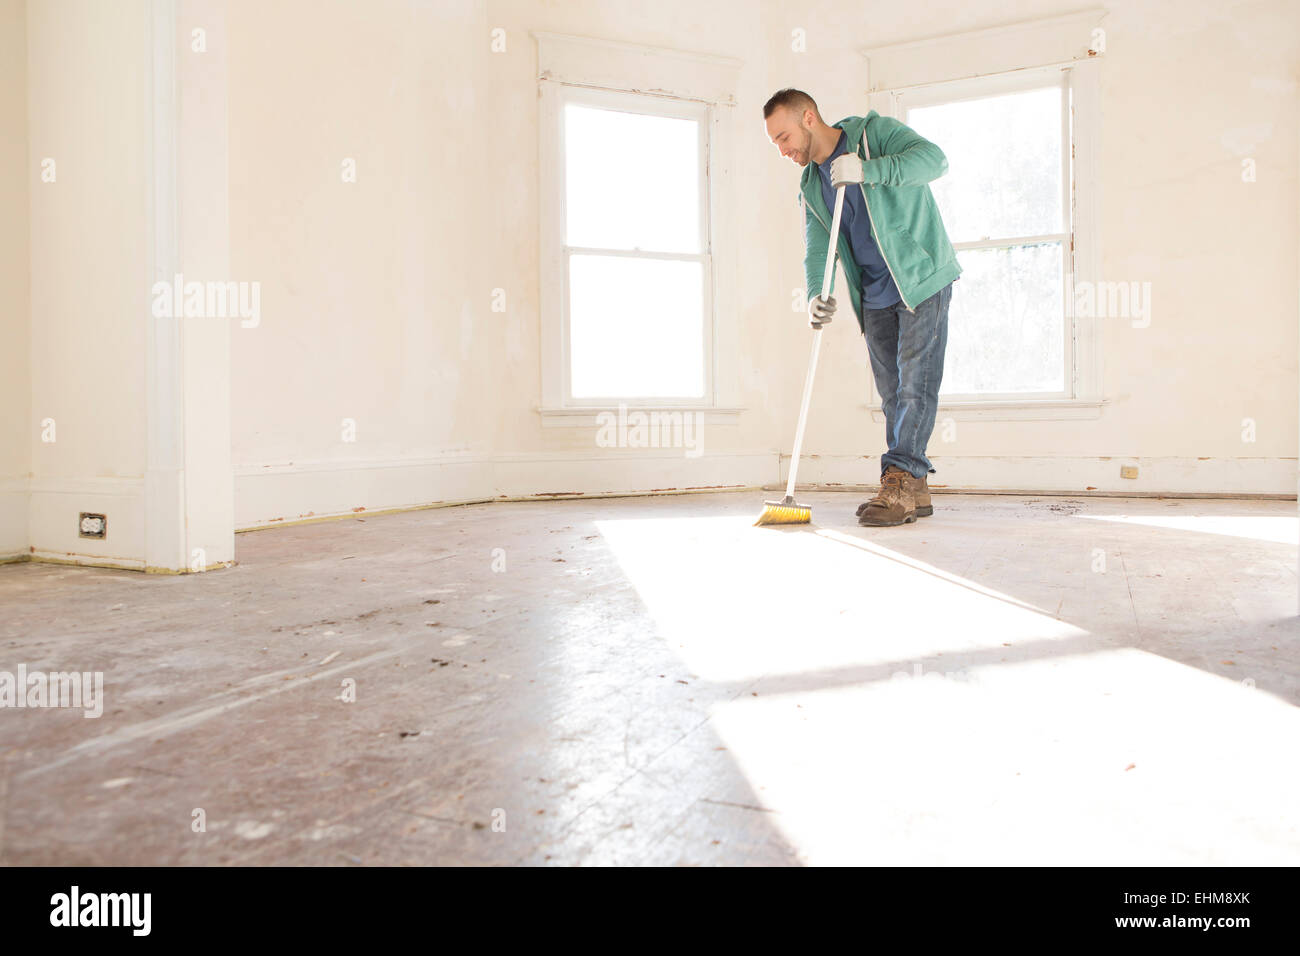 Mixed race man sweeping floor of new home Stock Photo